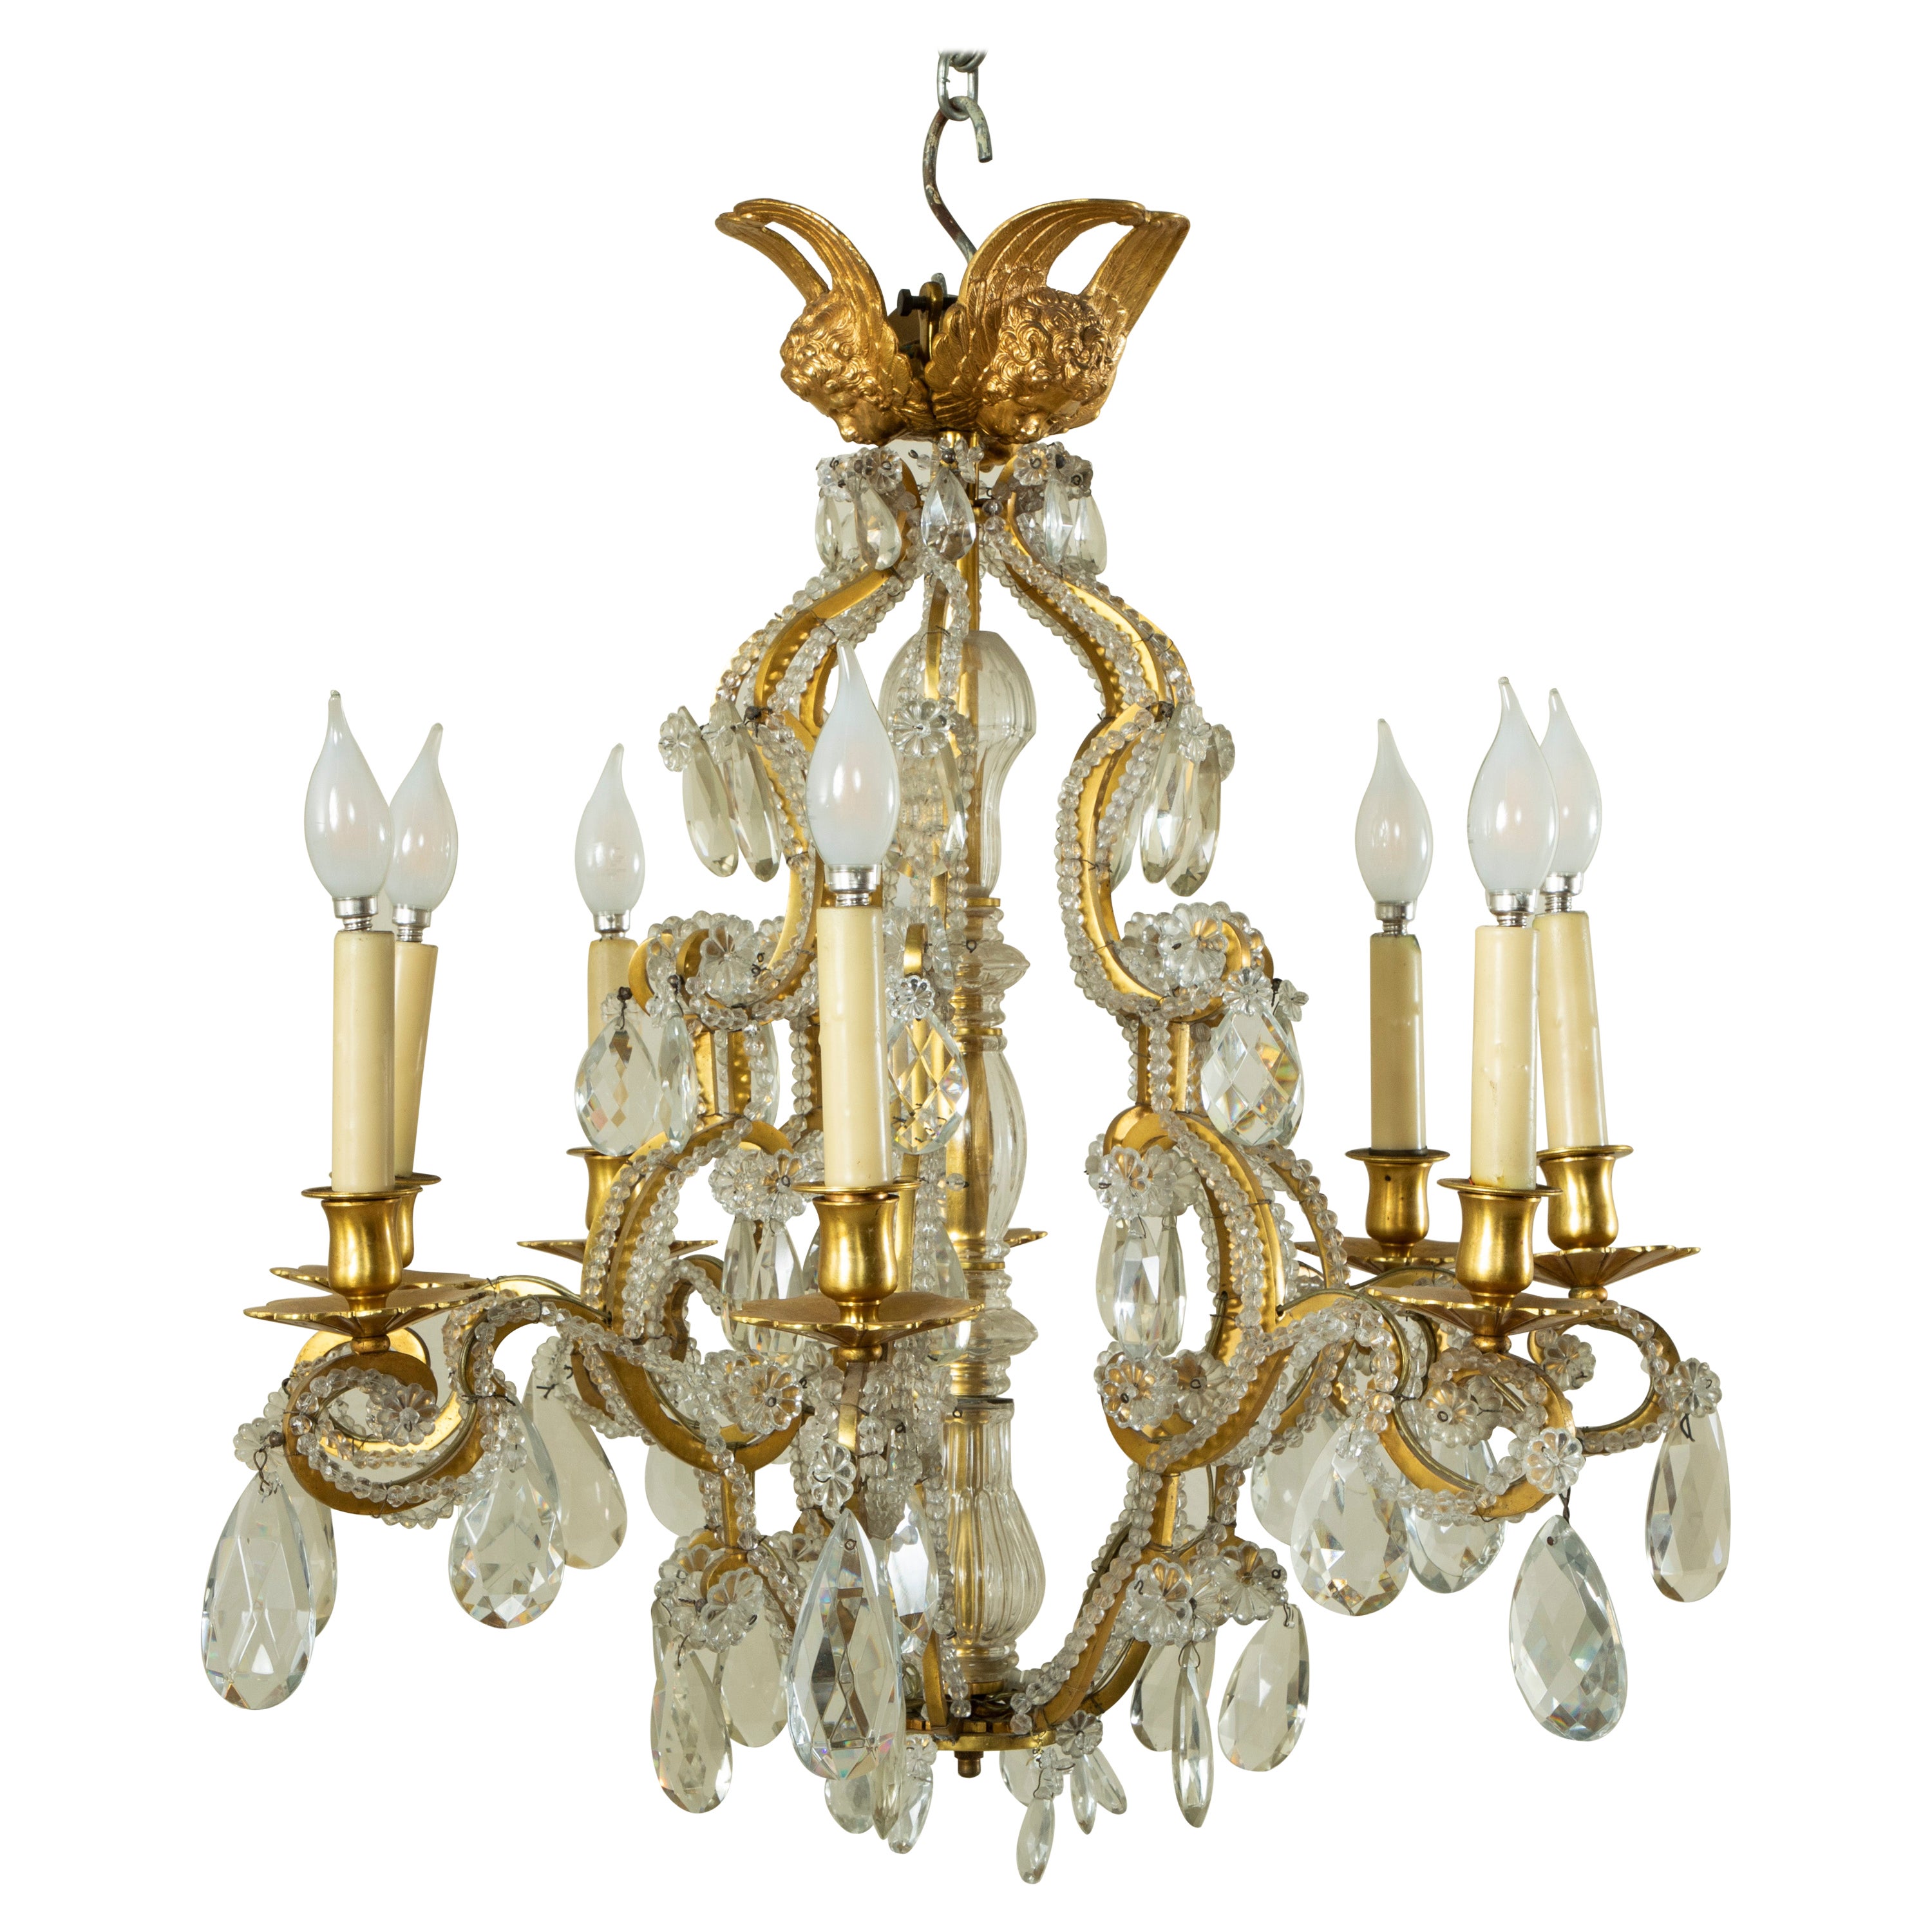 Mid-20th Century French Maison Bagues Bronze and Crystal Chandelier with Angels For Sale